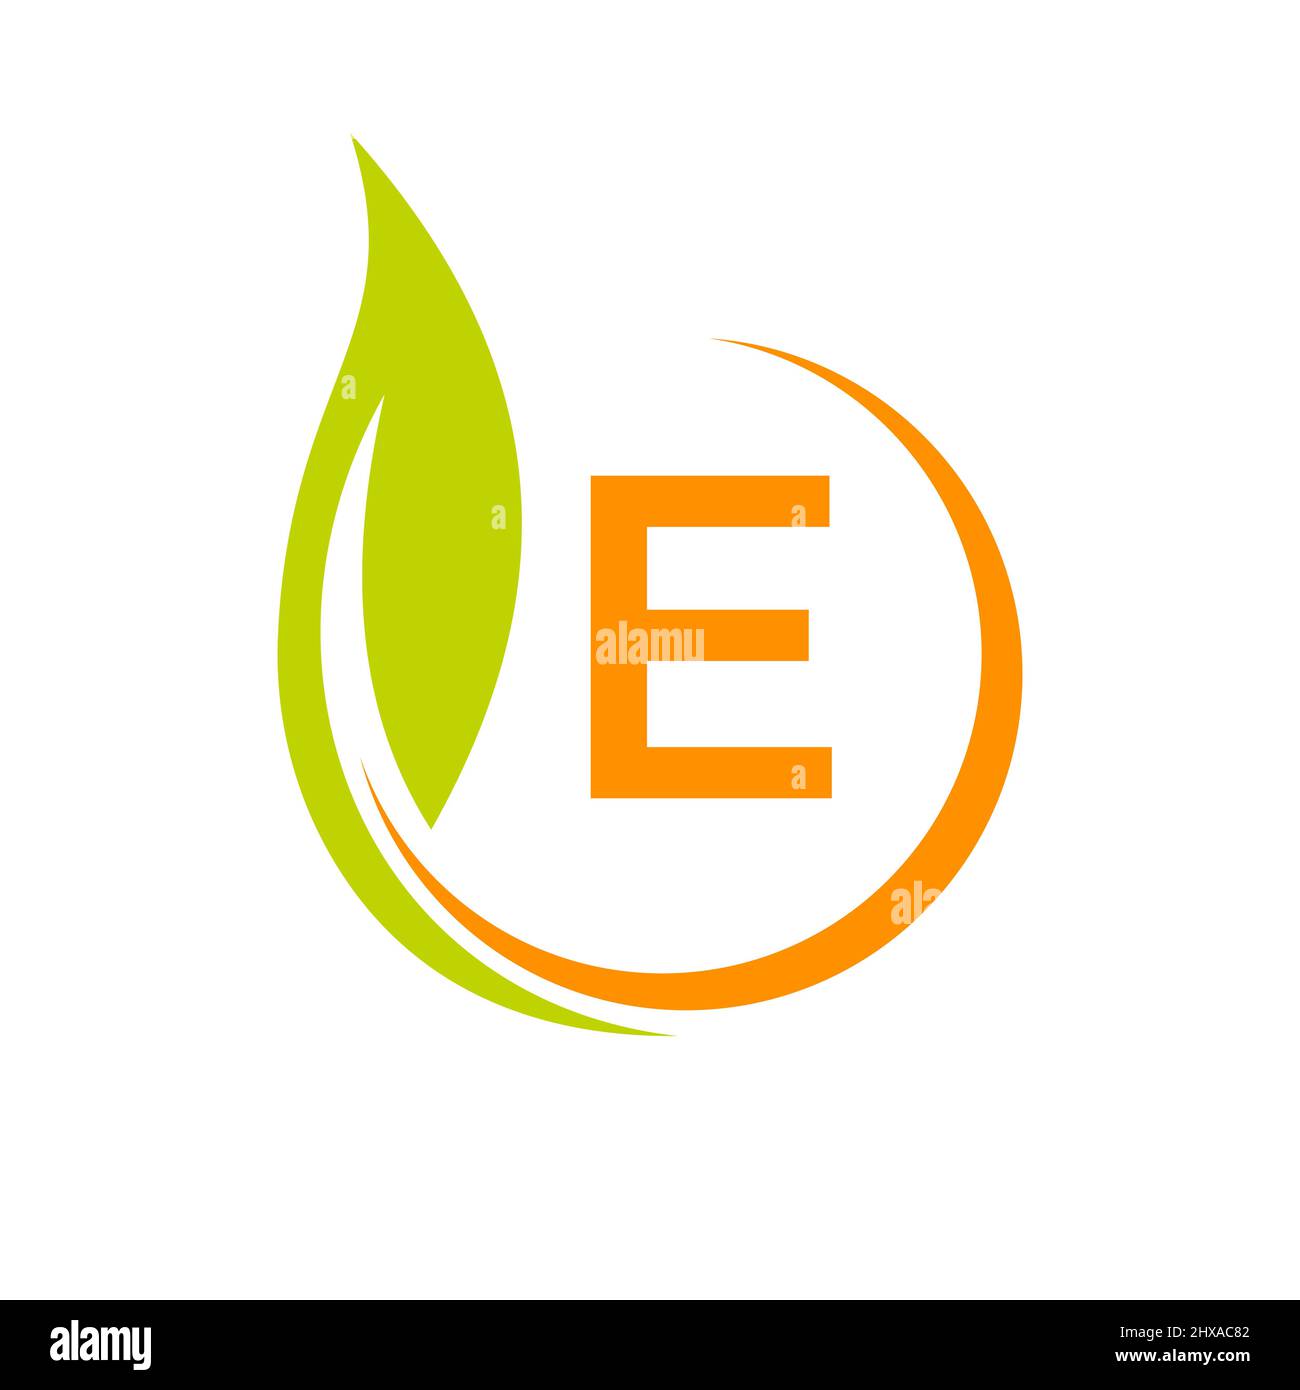 Healthy Natural Product Label Logo On Letter E Template. Letter E Eco Friendly, Green Tree Leaf Ecology Vector Concept Stock Vector